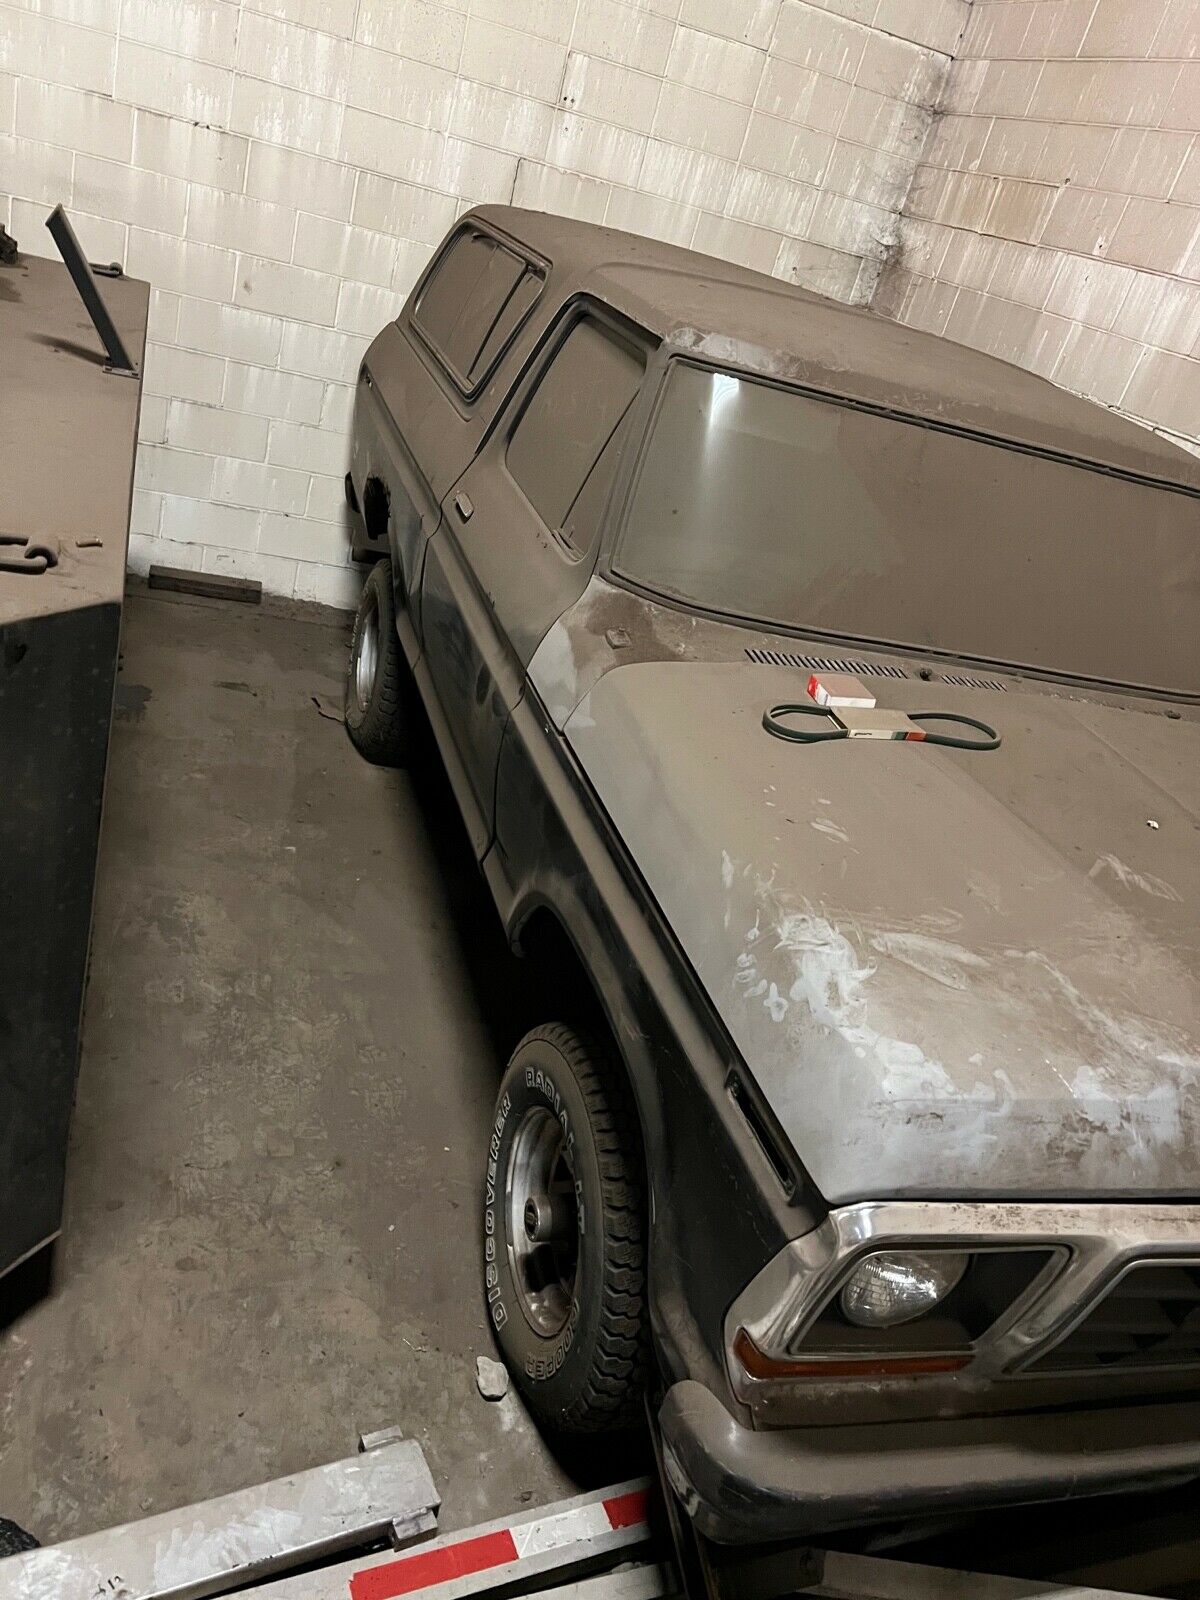 1978 ford bronco parked for 30 years looks dusty and dirty and ridiculously cool 183471 1